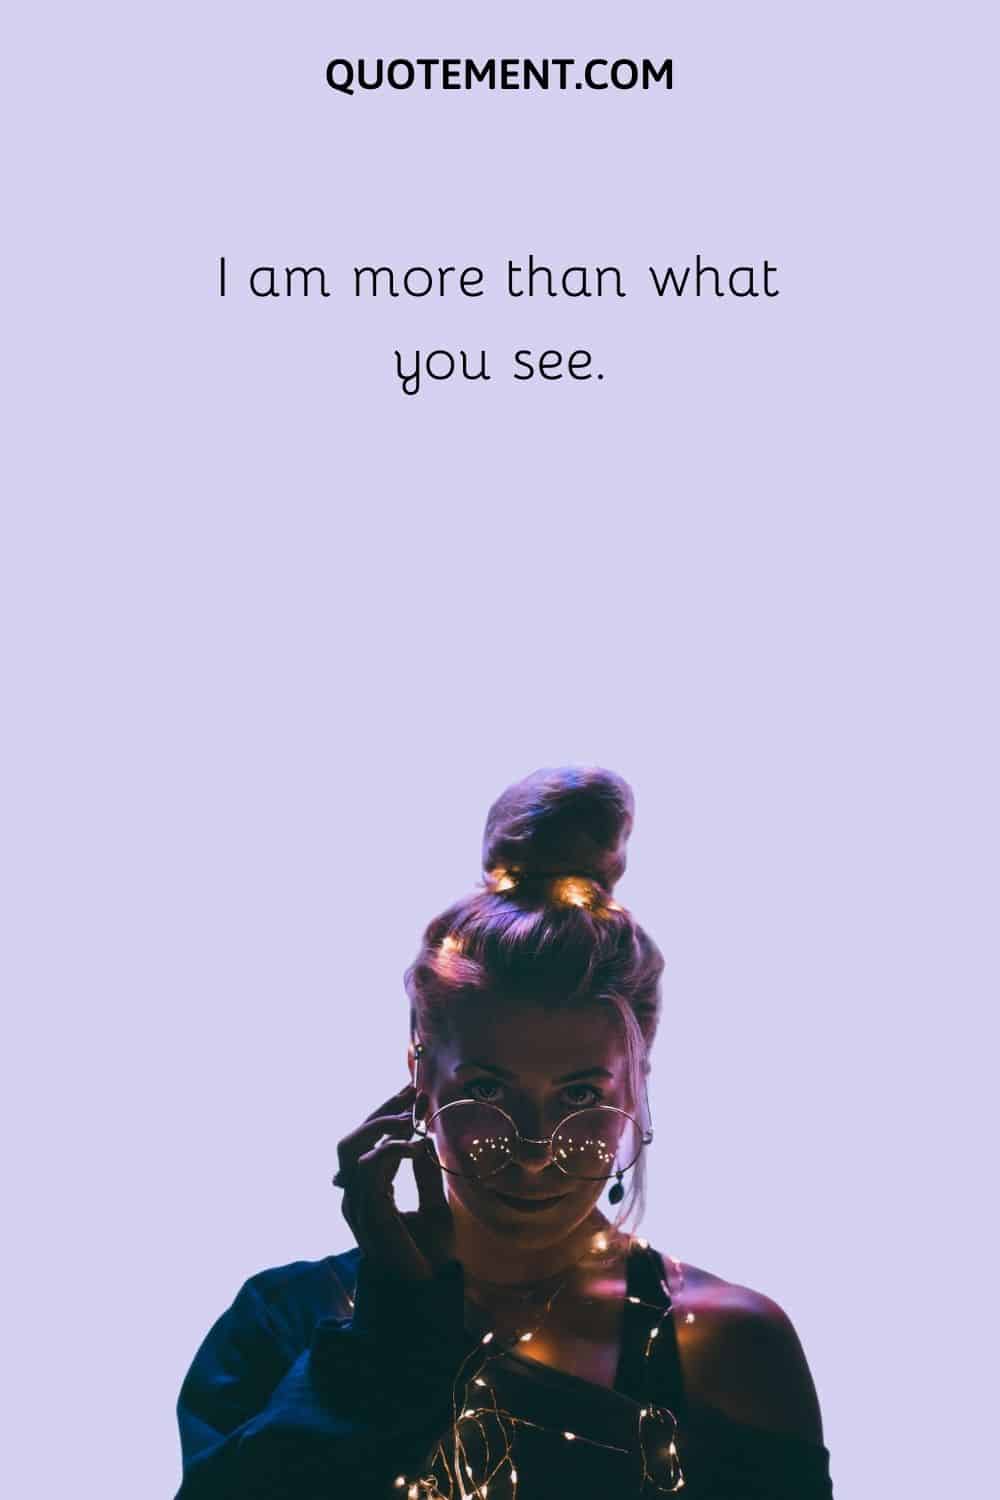 I am more than what you see